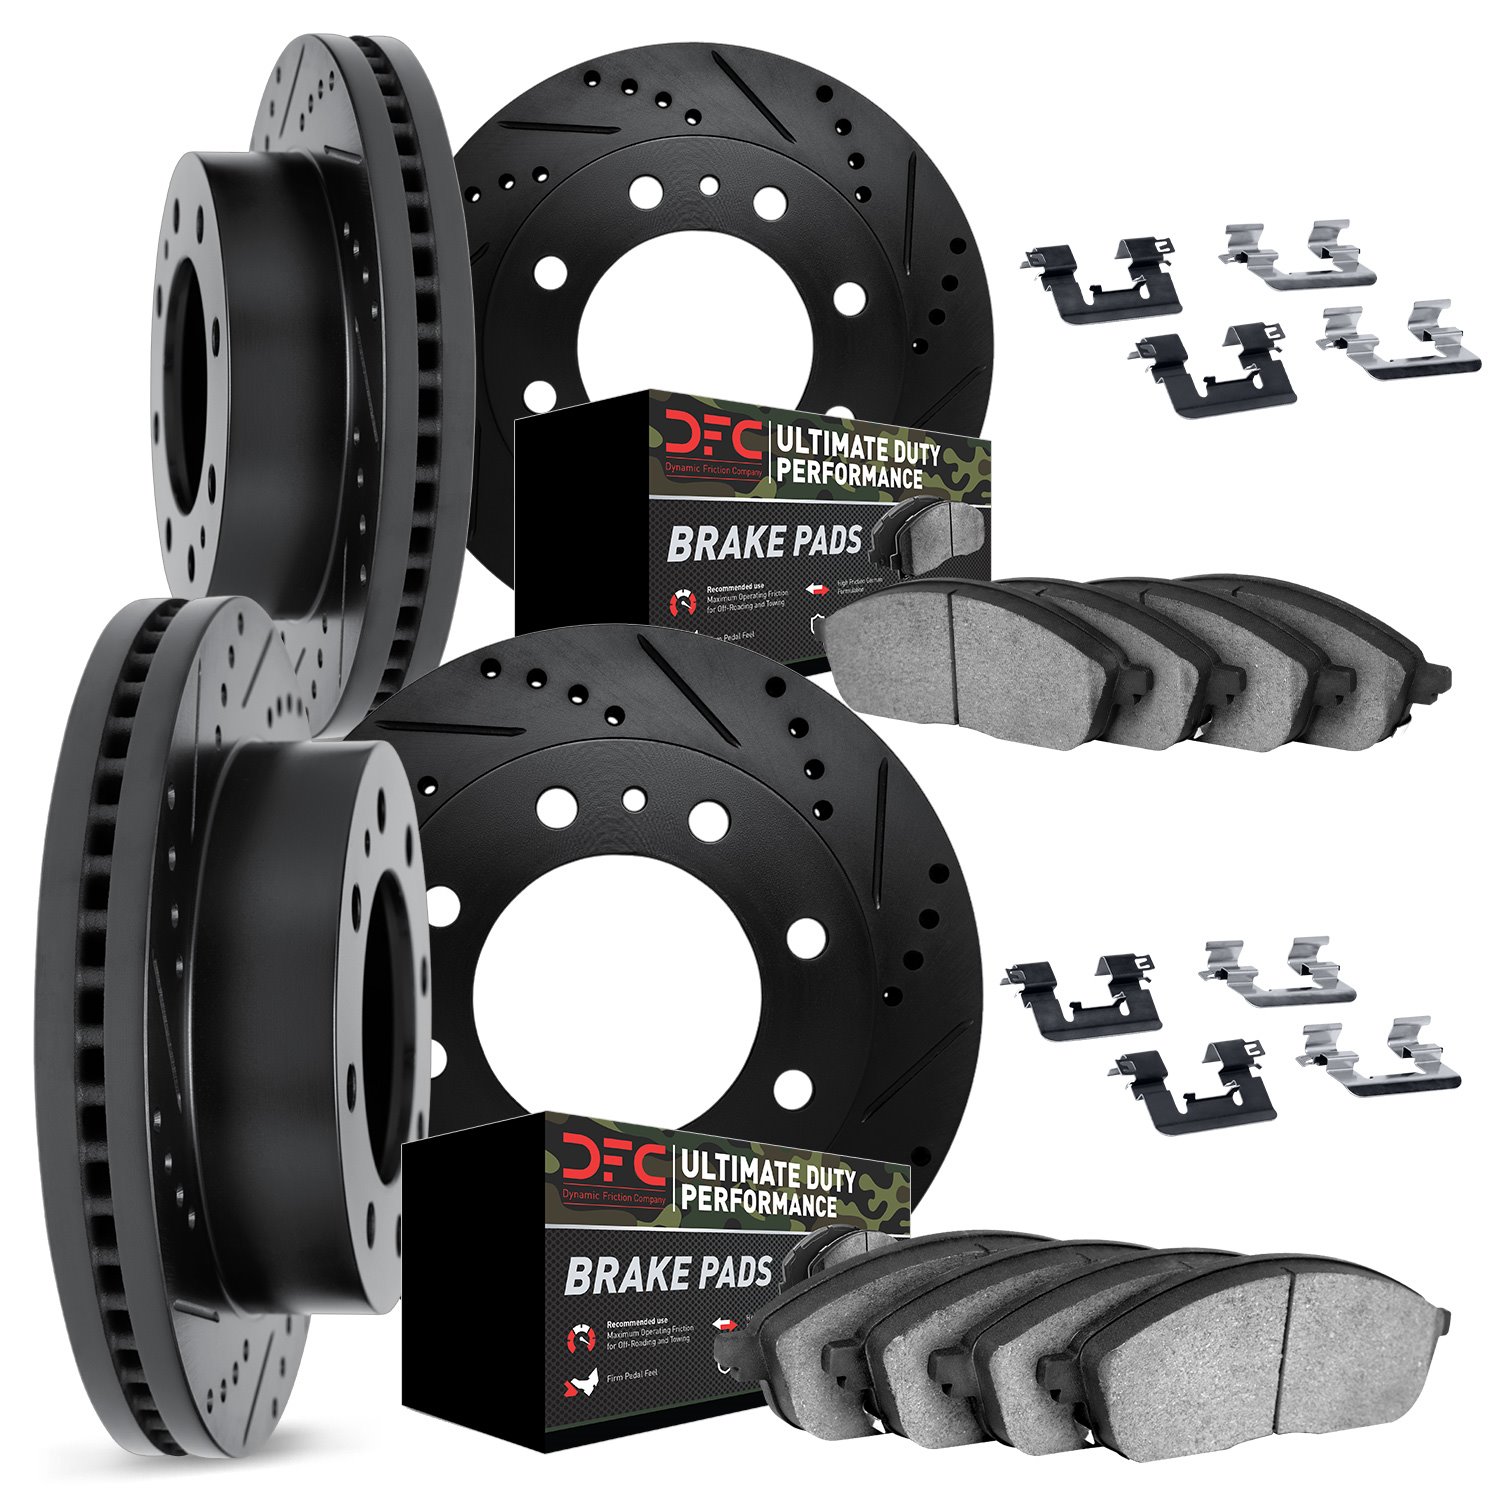 8414-54052 Drilled/Slotted Brake Rotors with Ultimate-Duty Brake Pads Kit & Hardware [Black], Fits Select Ford/Lincoln/Mercury/M